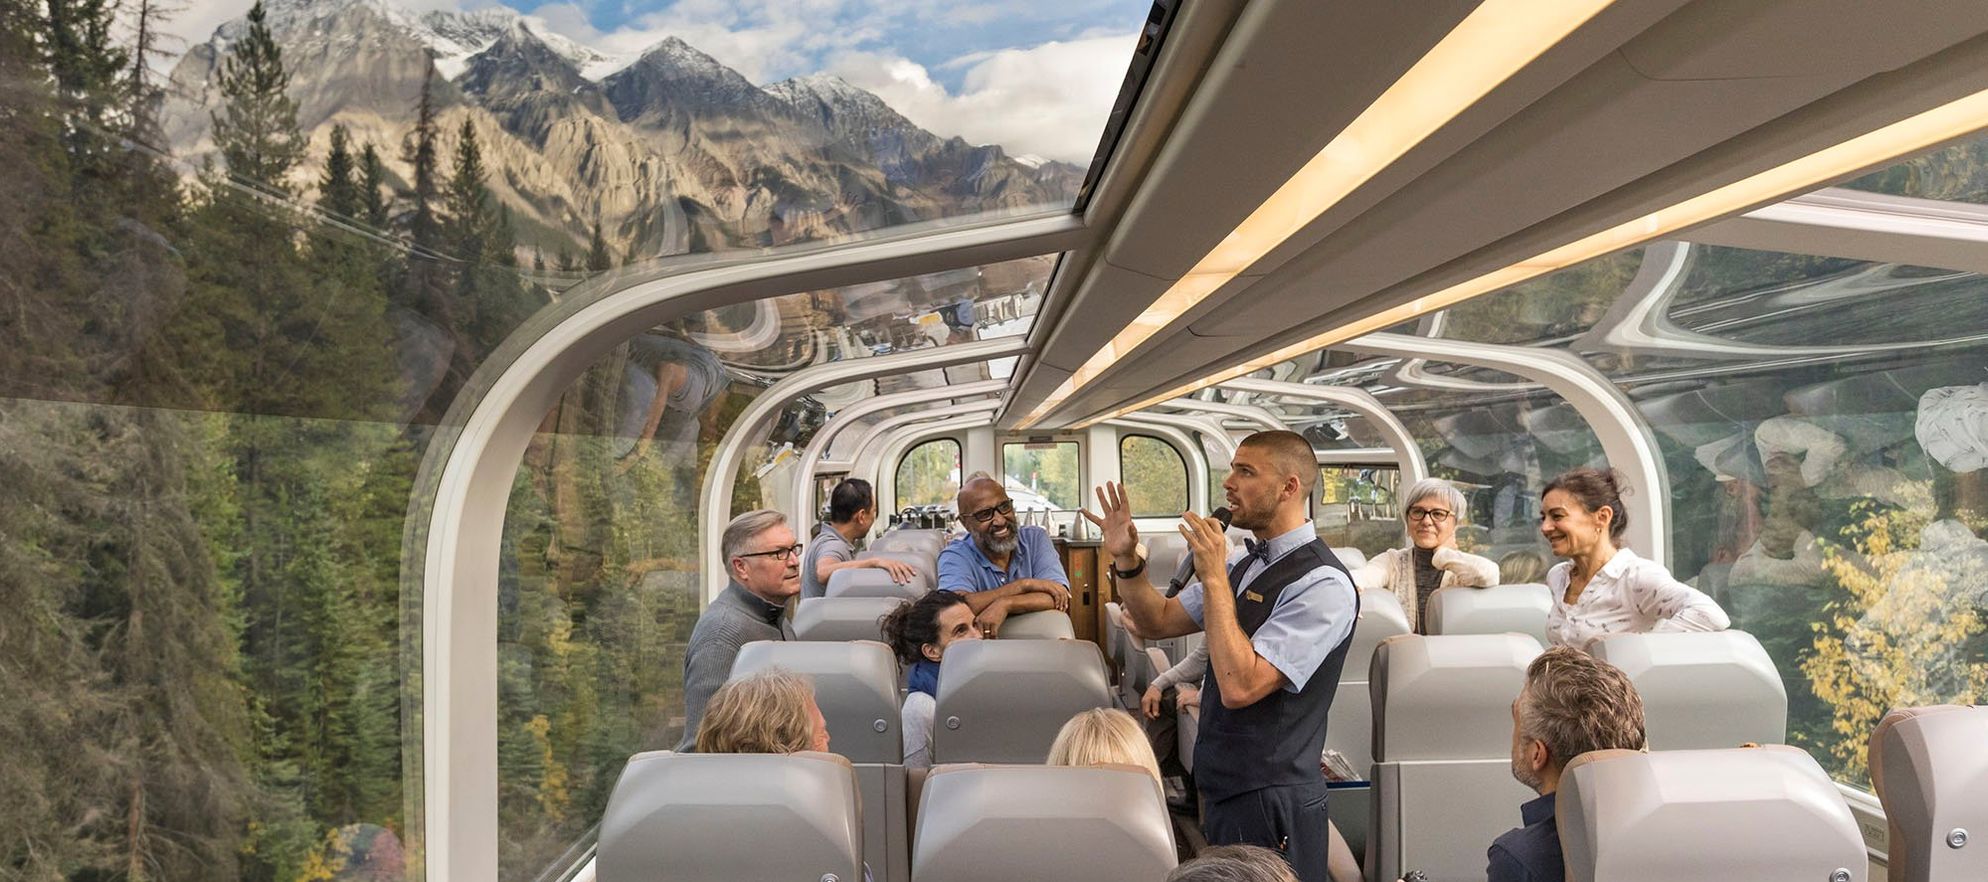 Rocky Mountaineer train in Banff National Park